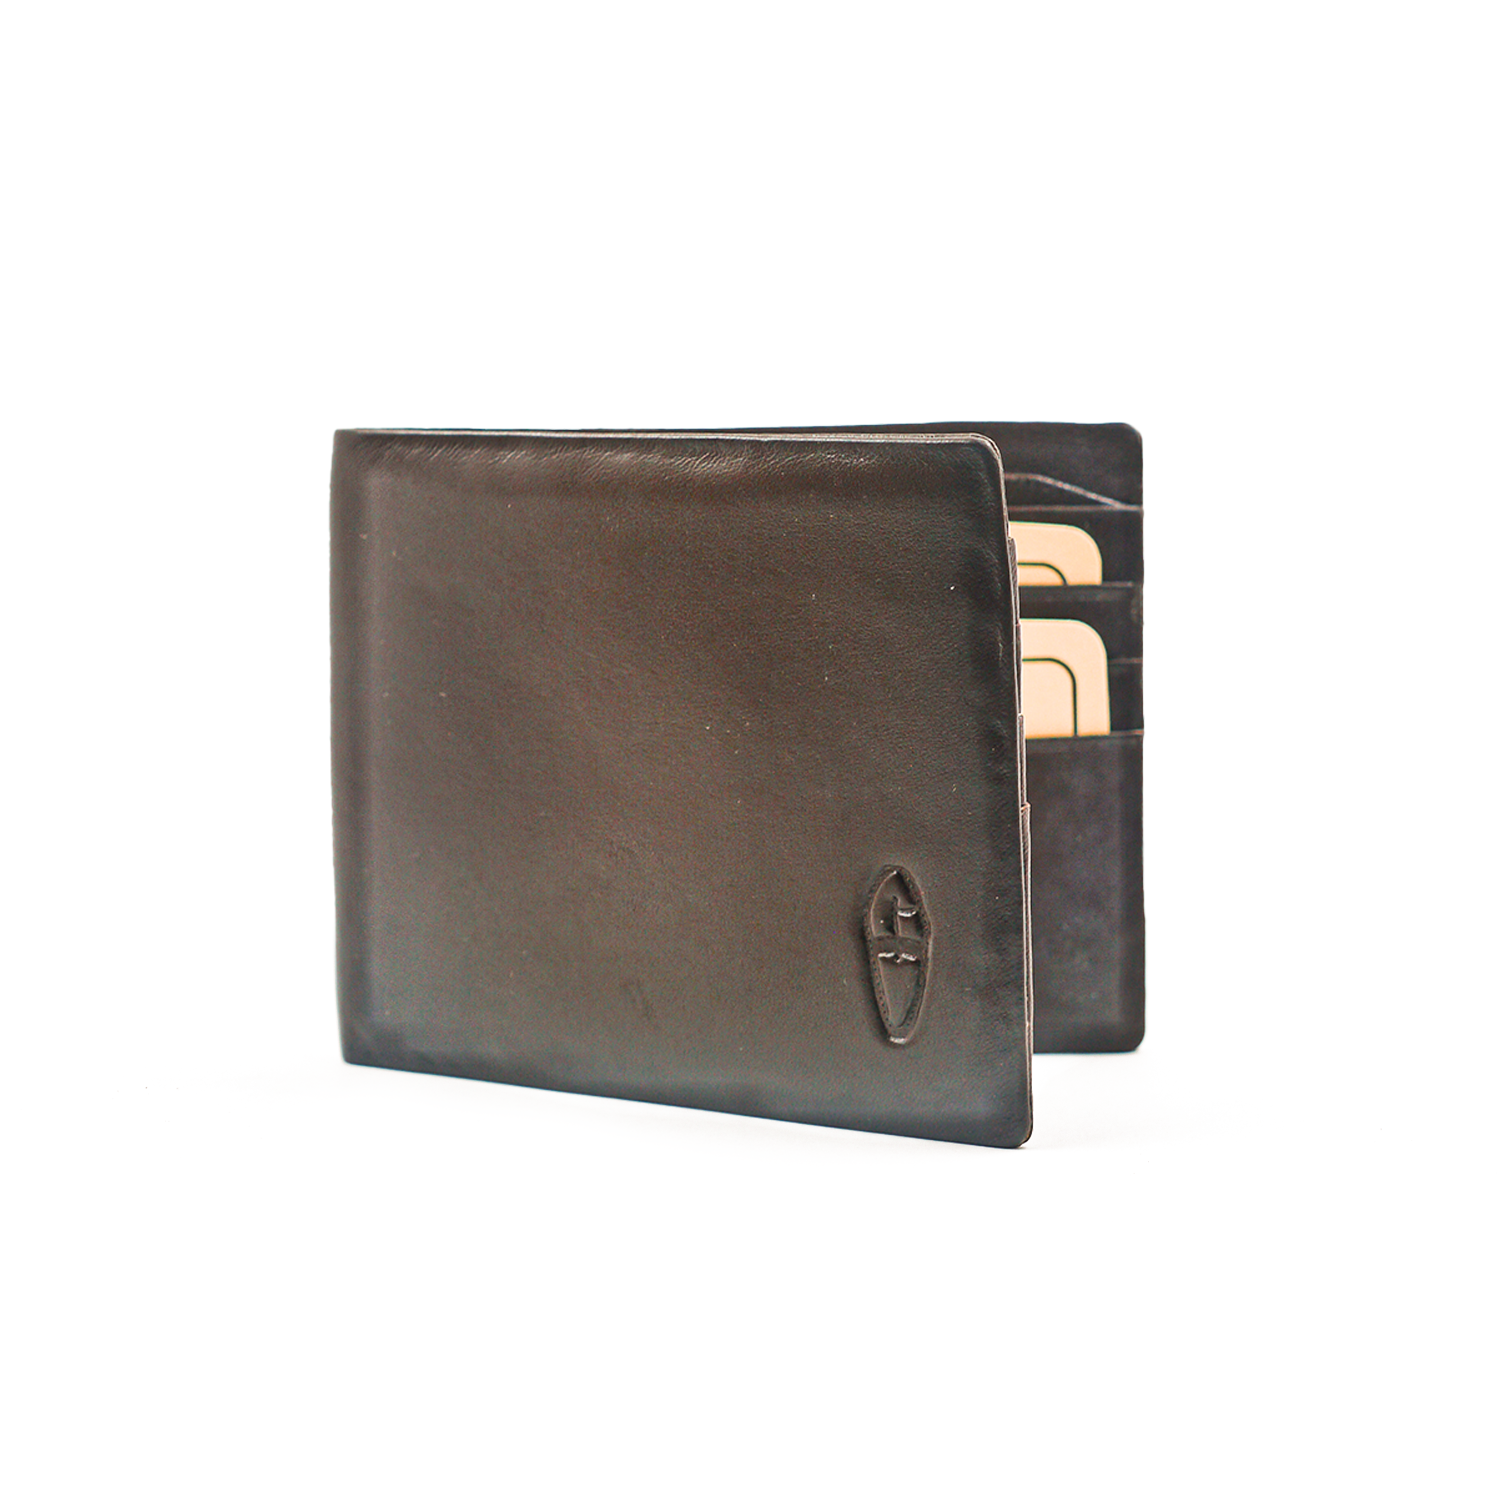 Seamless Elegance: RFID-Protected Stitchless Premium NAPPA Leather Wallets for Men - Brown